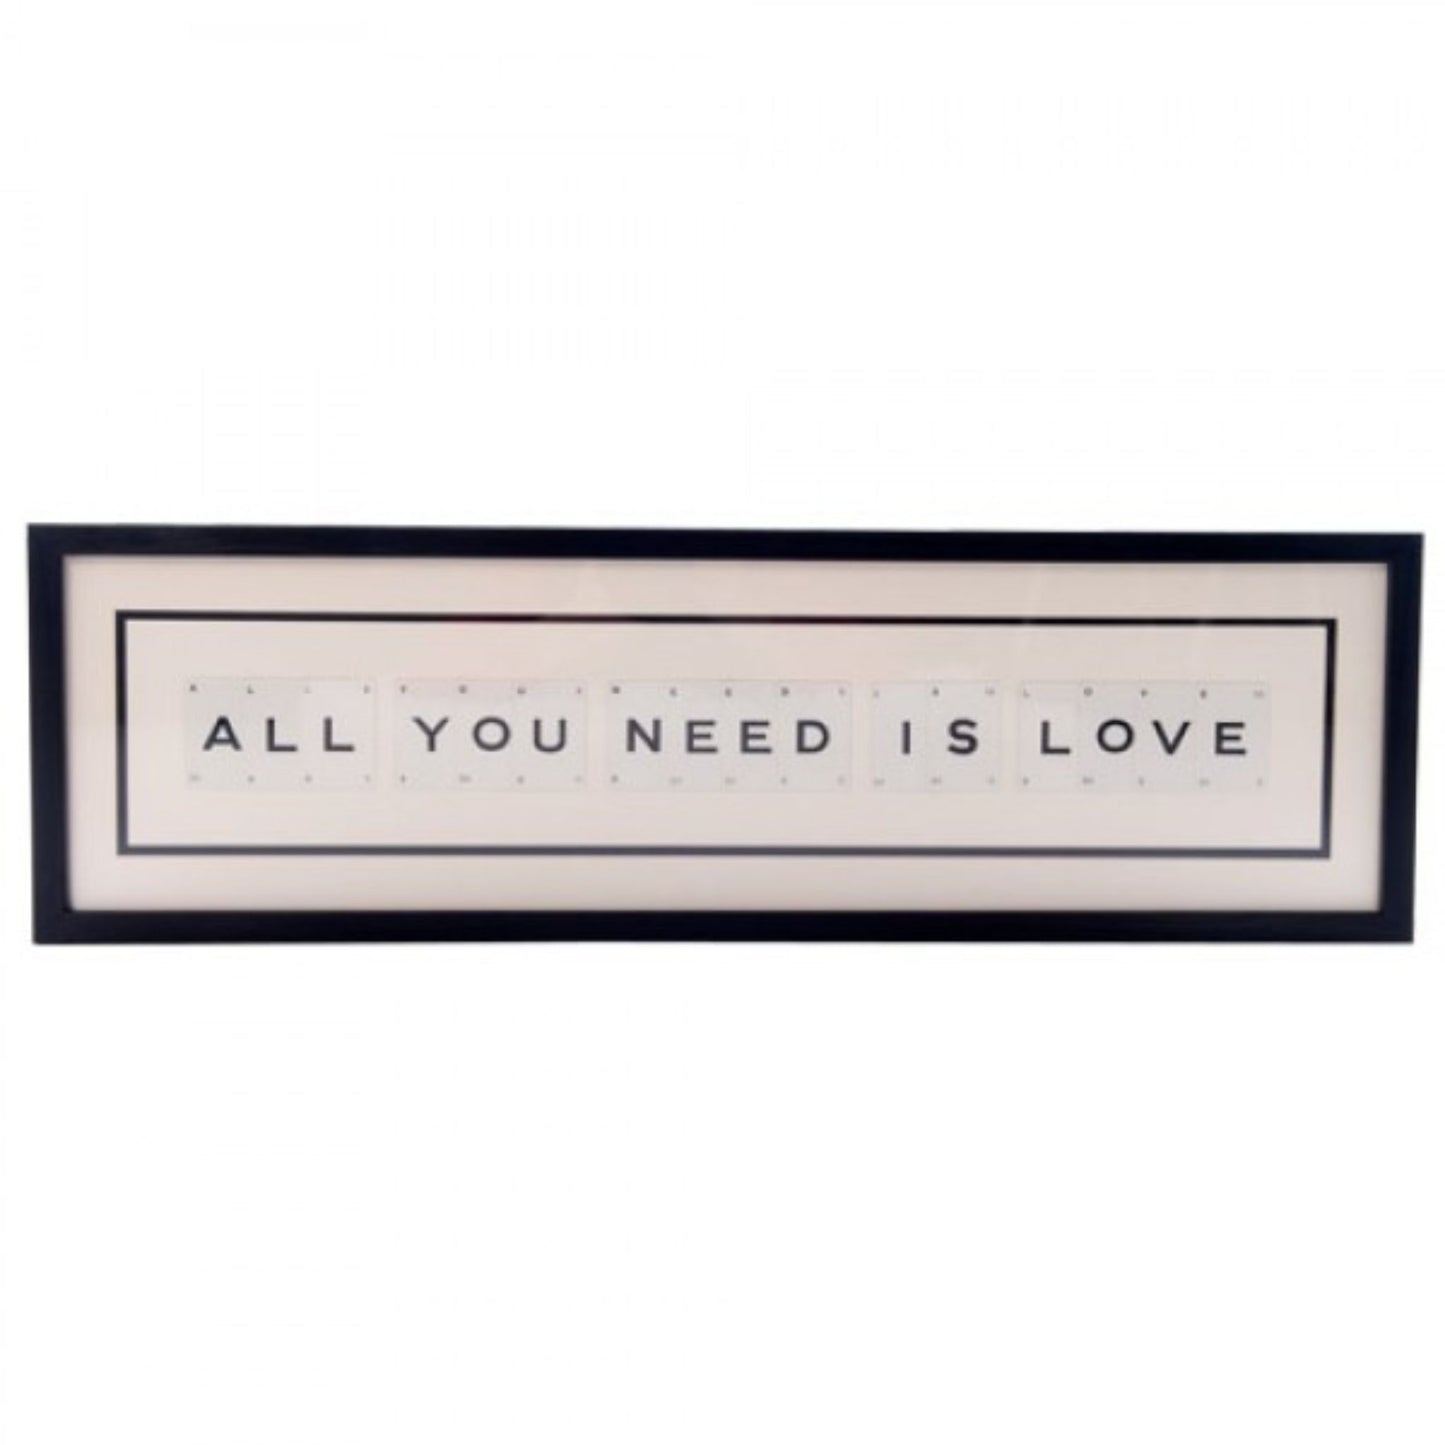 All You Need is Love Frame